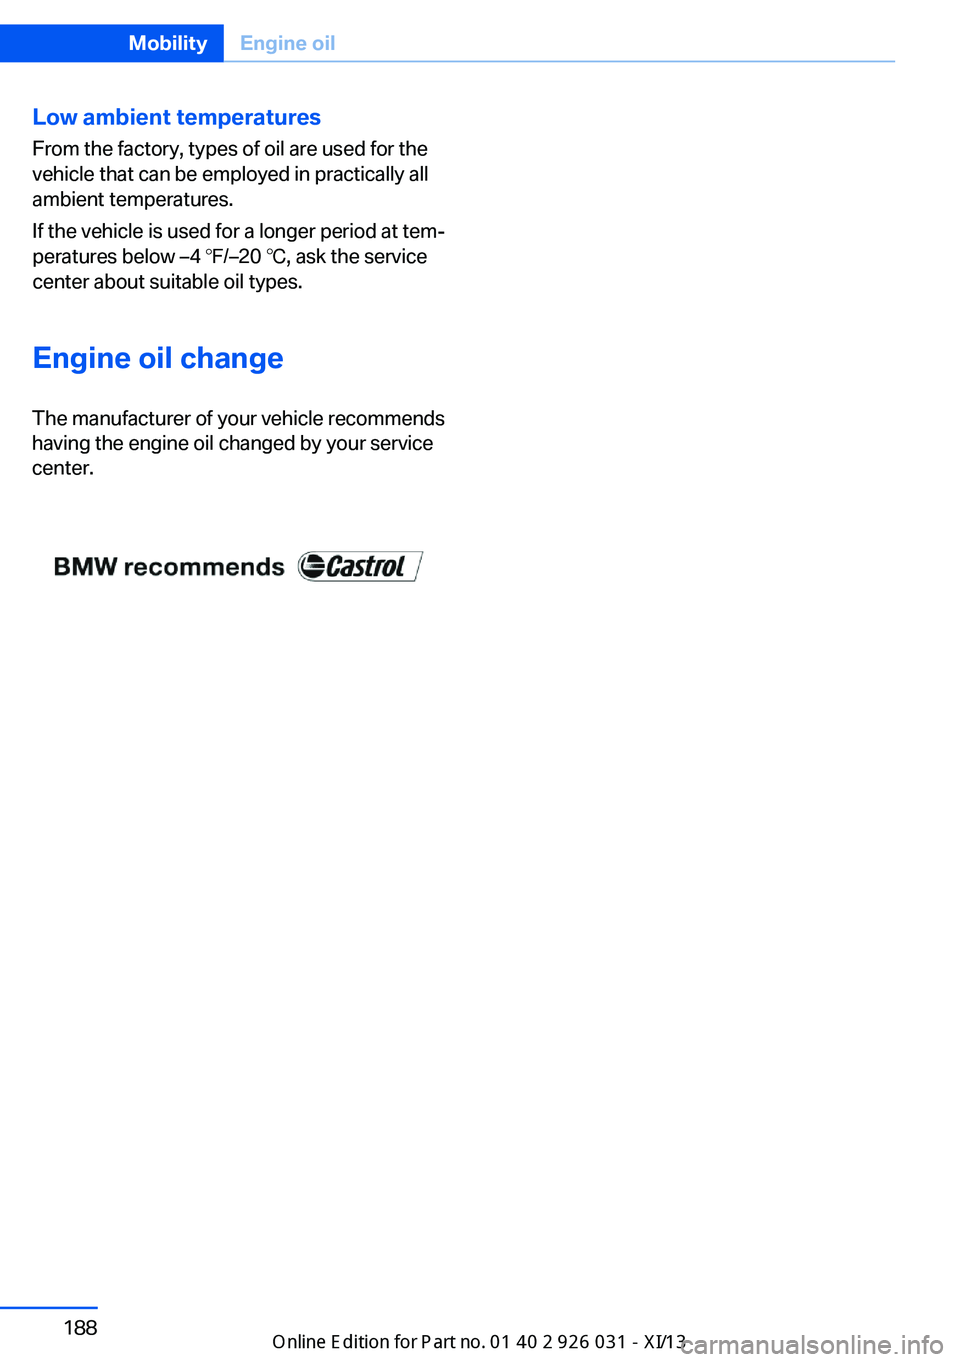 BMW M5 2013 F10 Owners Manual Low ambient temperatures
From the factory, types of oil are used for the
vehicle that can be employed in practically all
ambient temperatures.
If the vehicle is used for a longer period at tem‐
pera